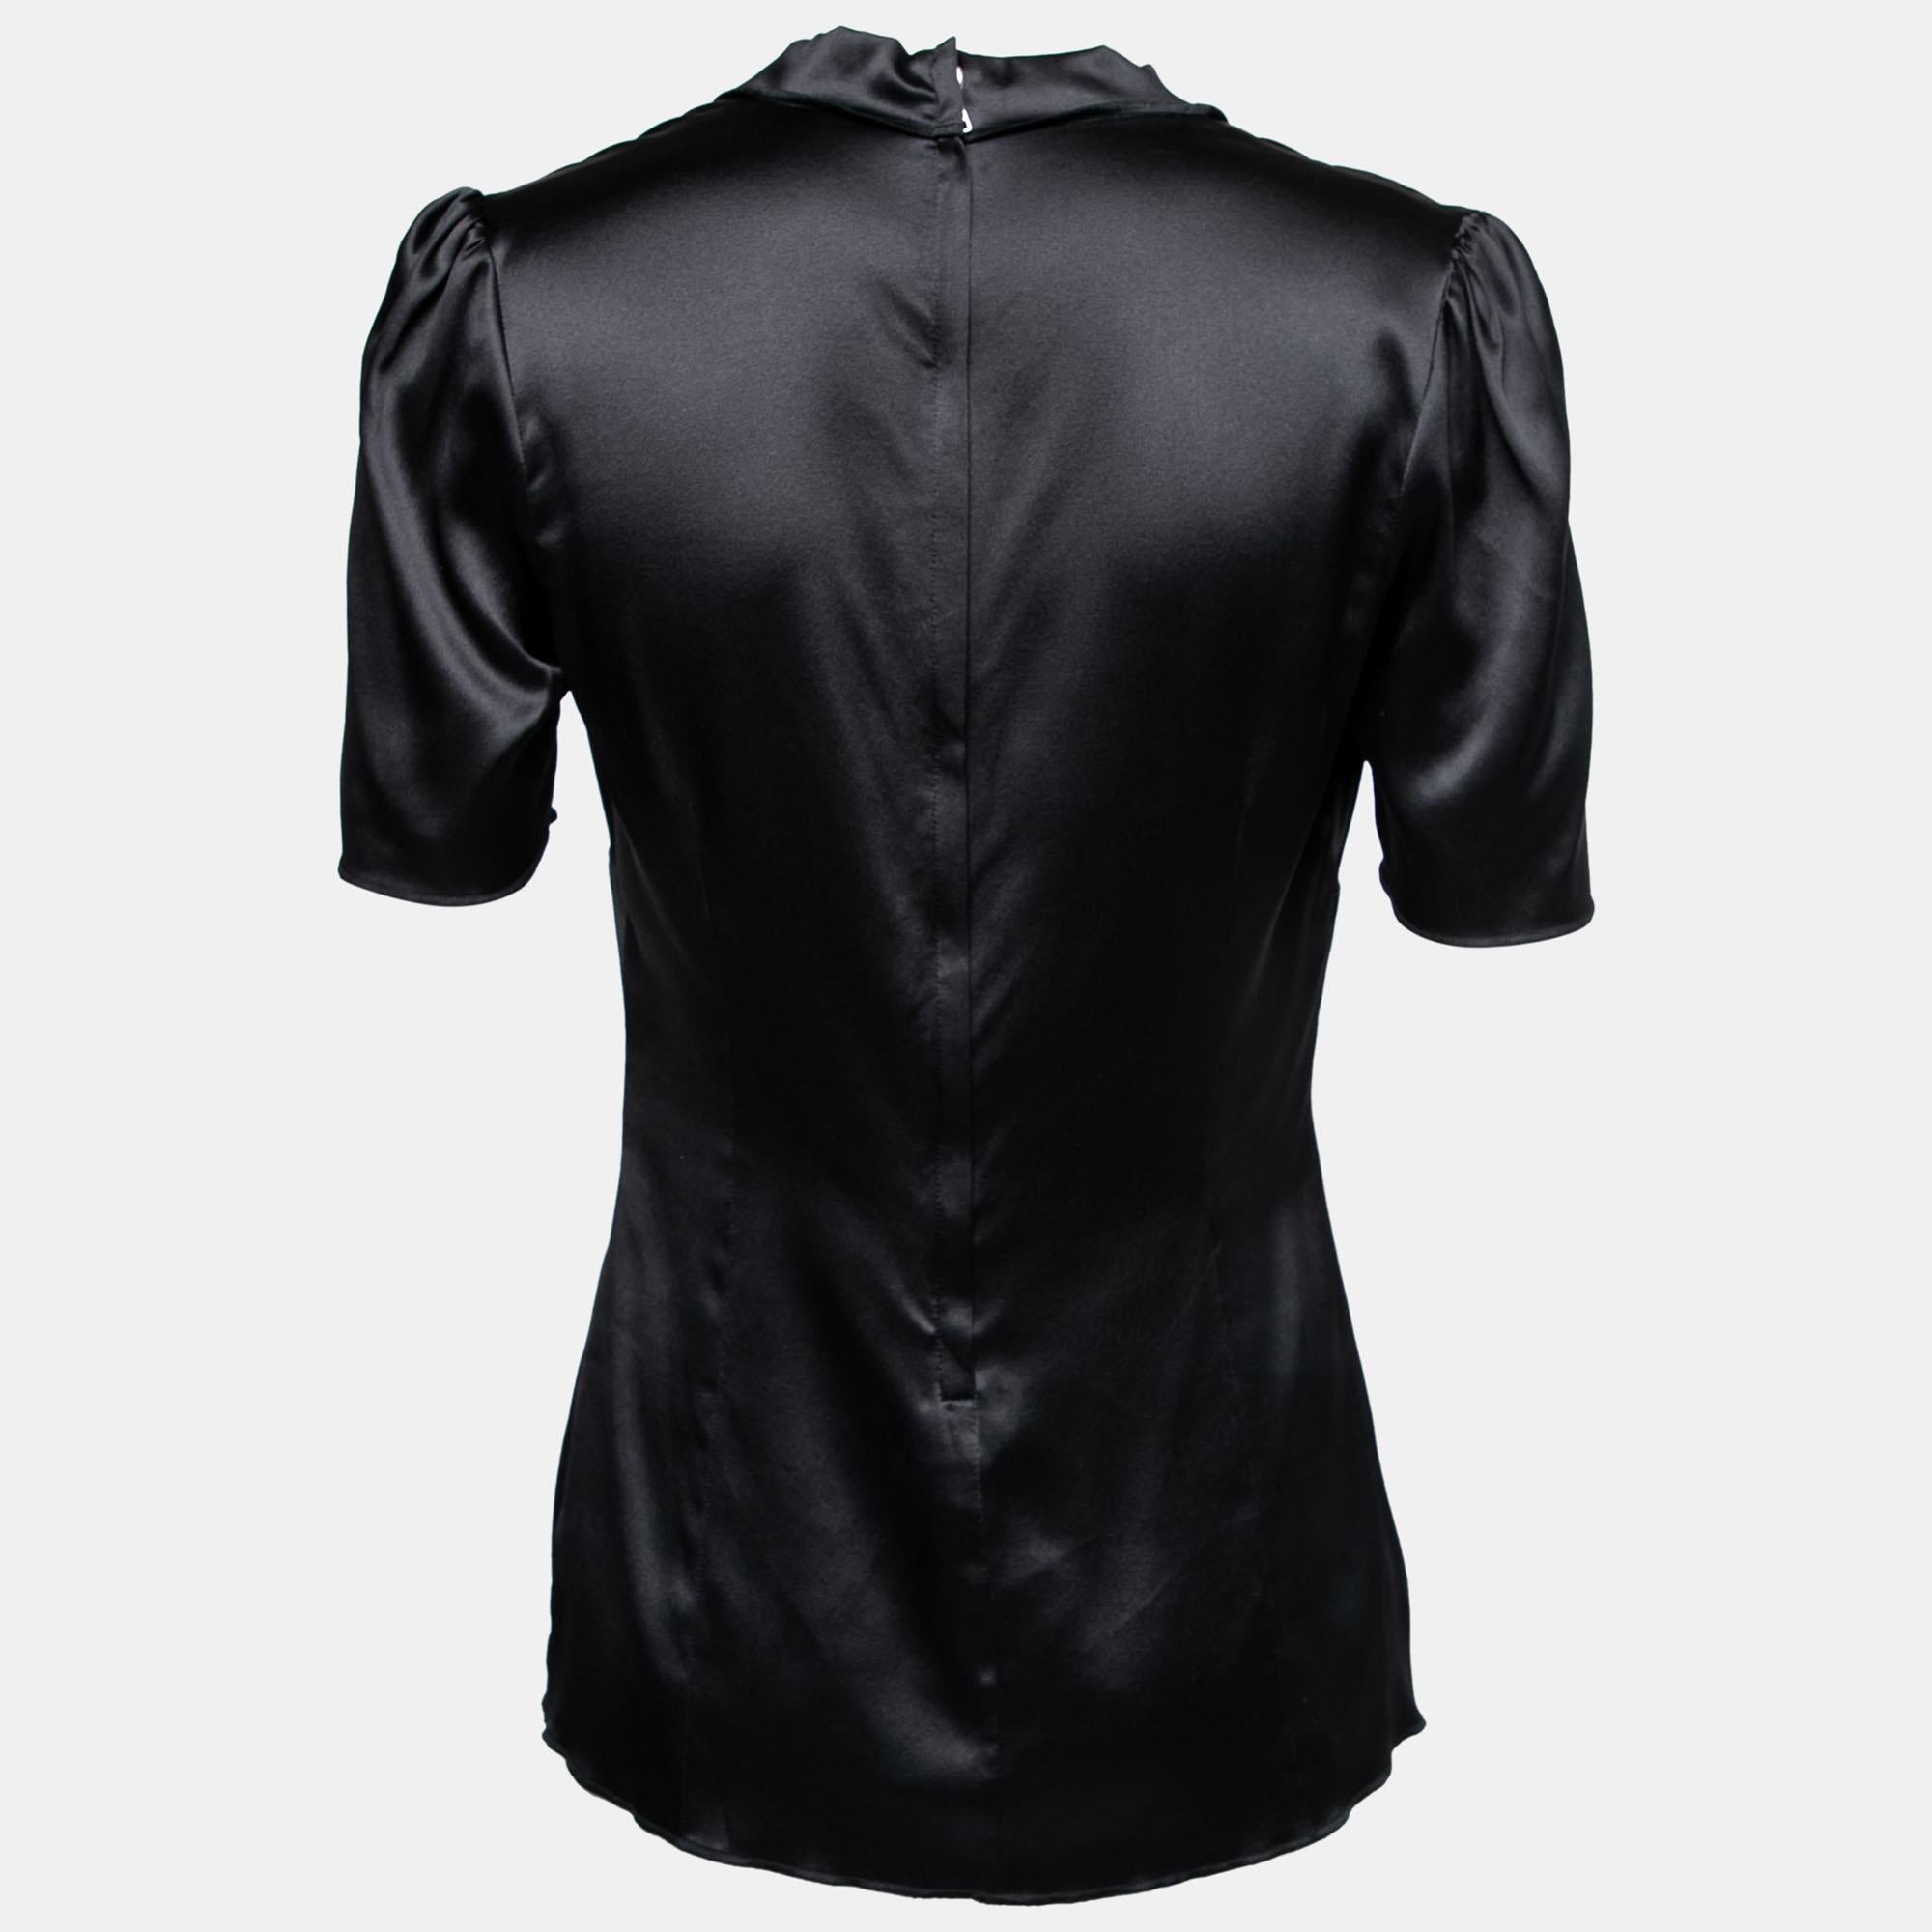 The house of Dolce & Gabbana brings you this super-stylish, sleek blouse for your evening wear. Crafted meticulously with silk satin, it comes with short sleeves and a zip closure. The flattering silhouette of the black blouse will look lovely with